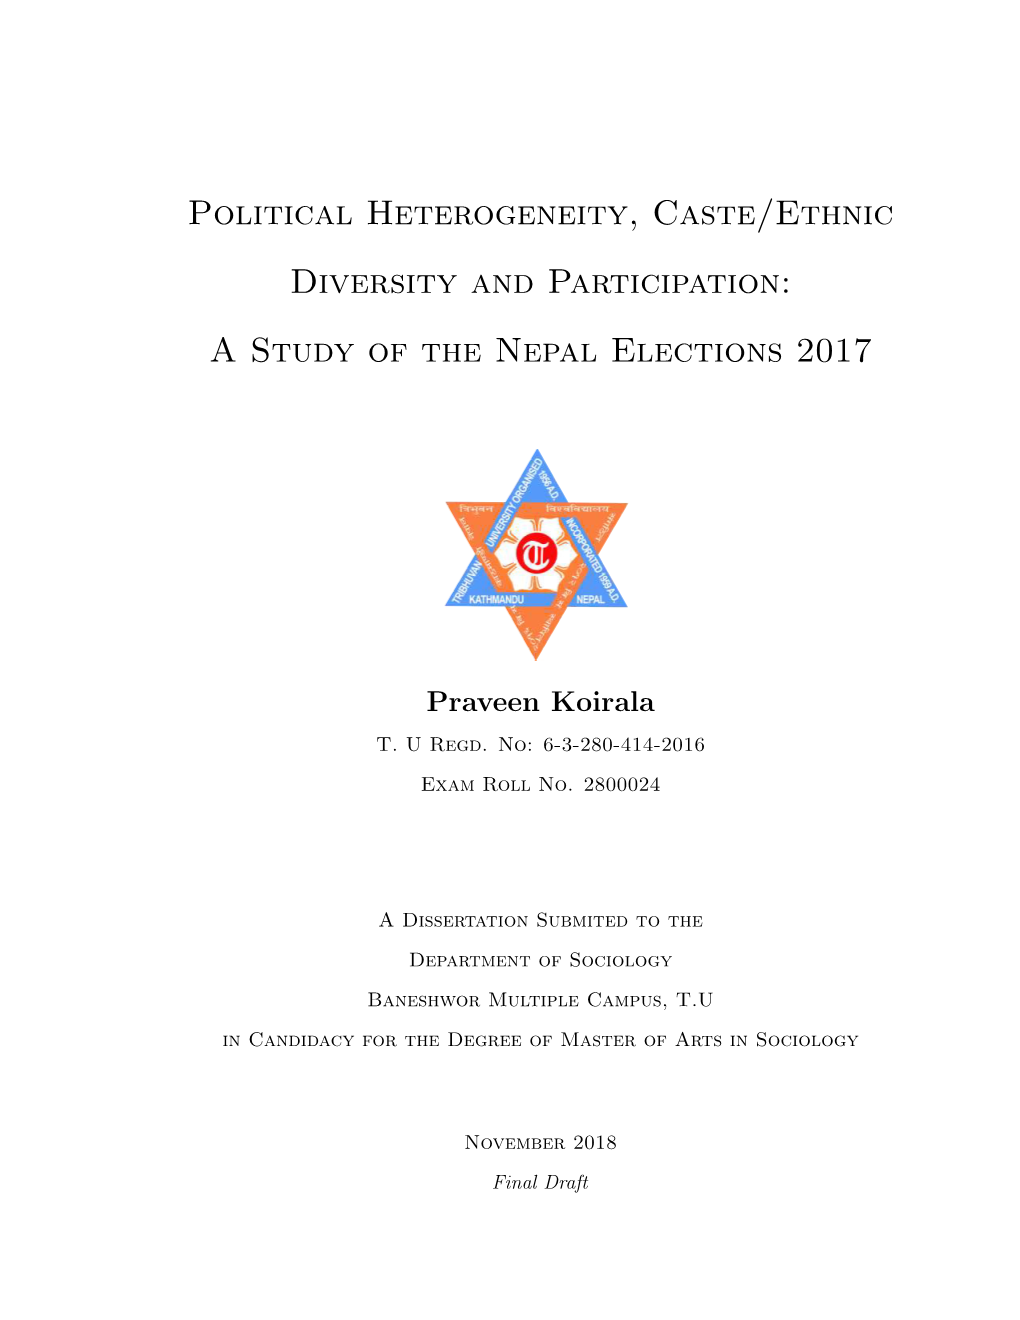 Political Heterogeneity, Caste/Ethnic Diversity and Participation: a Study of the Nepal Elections 2017